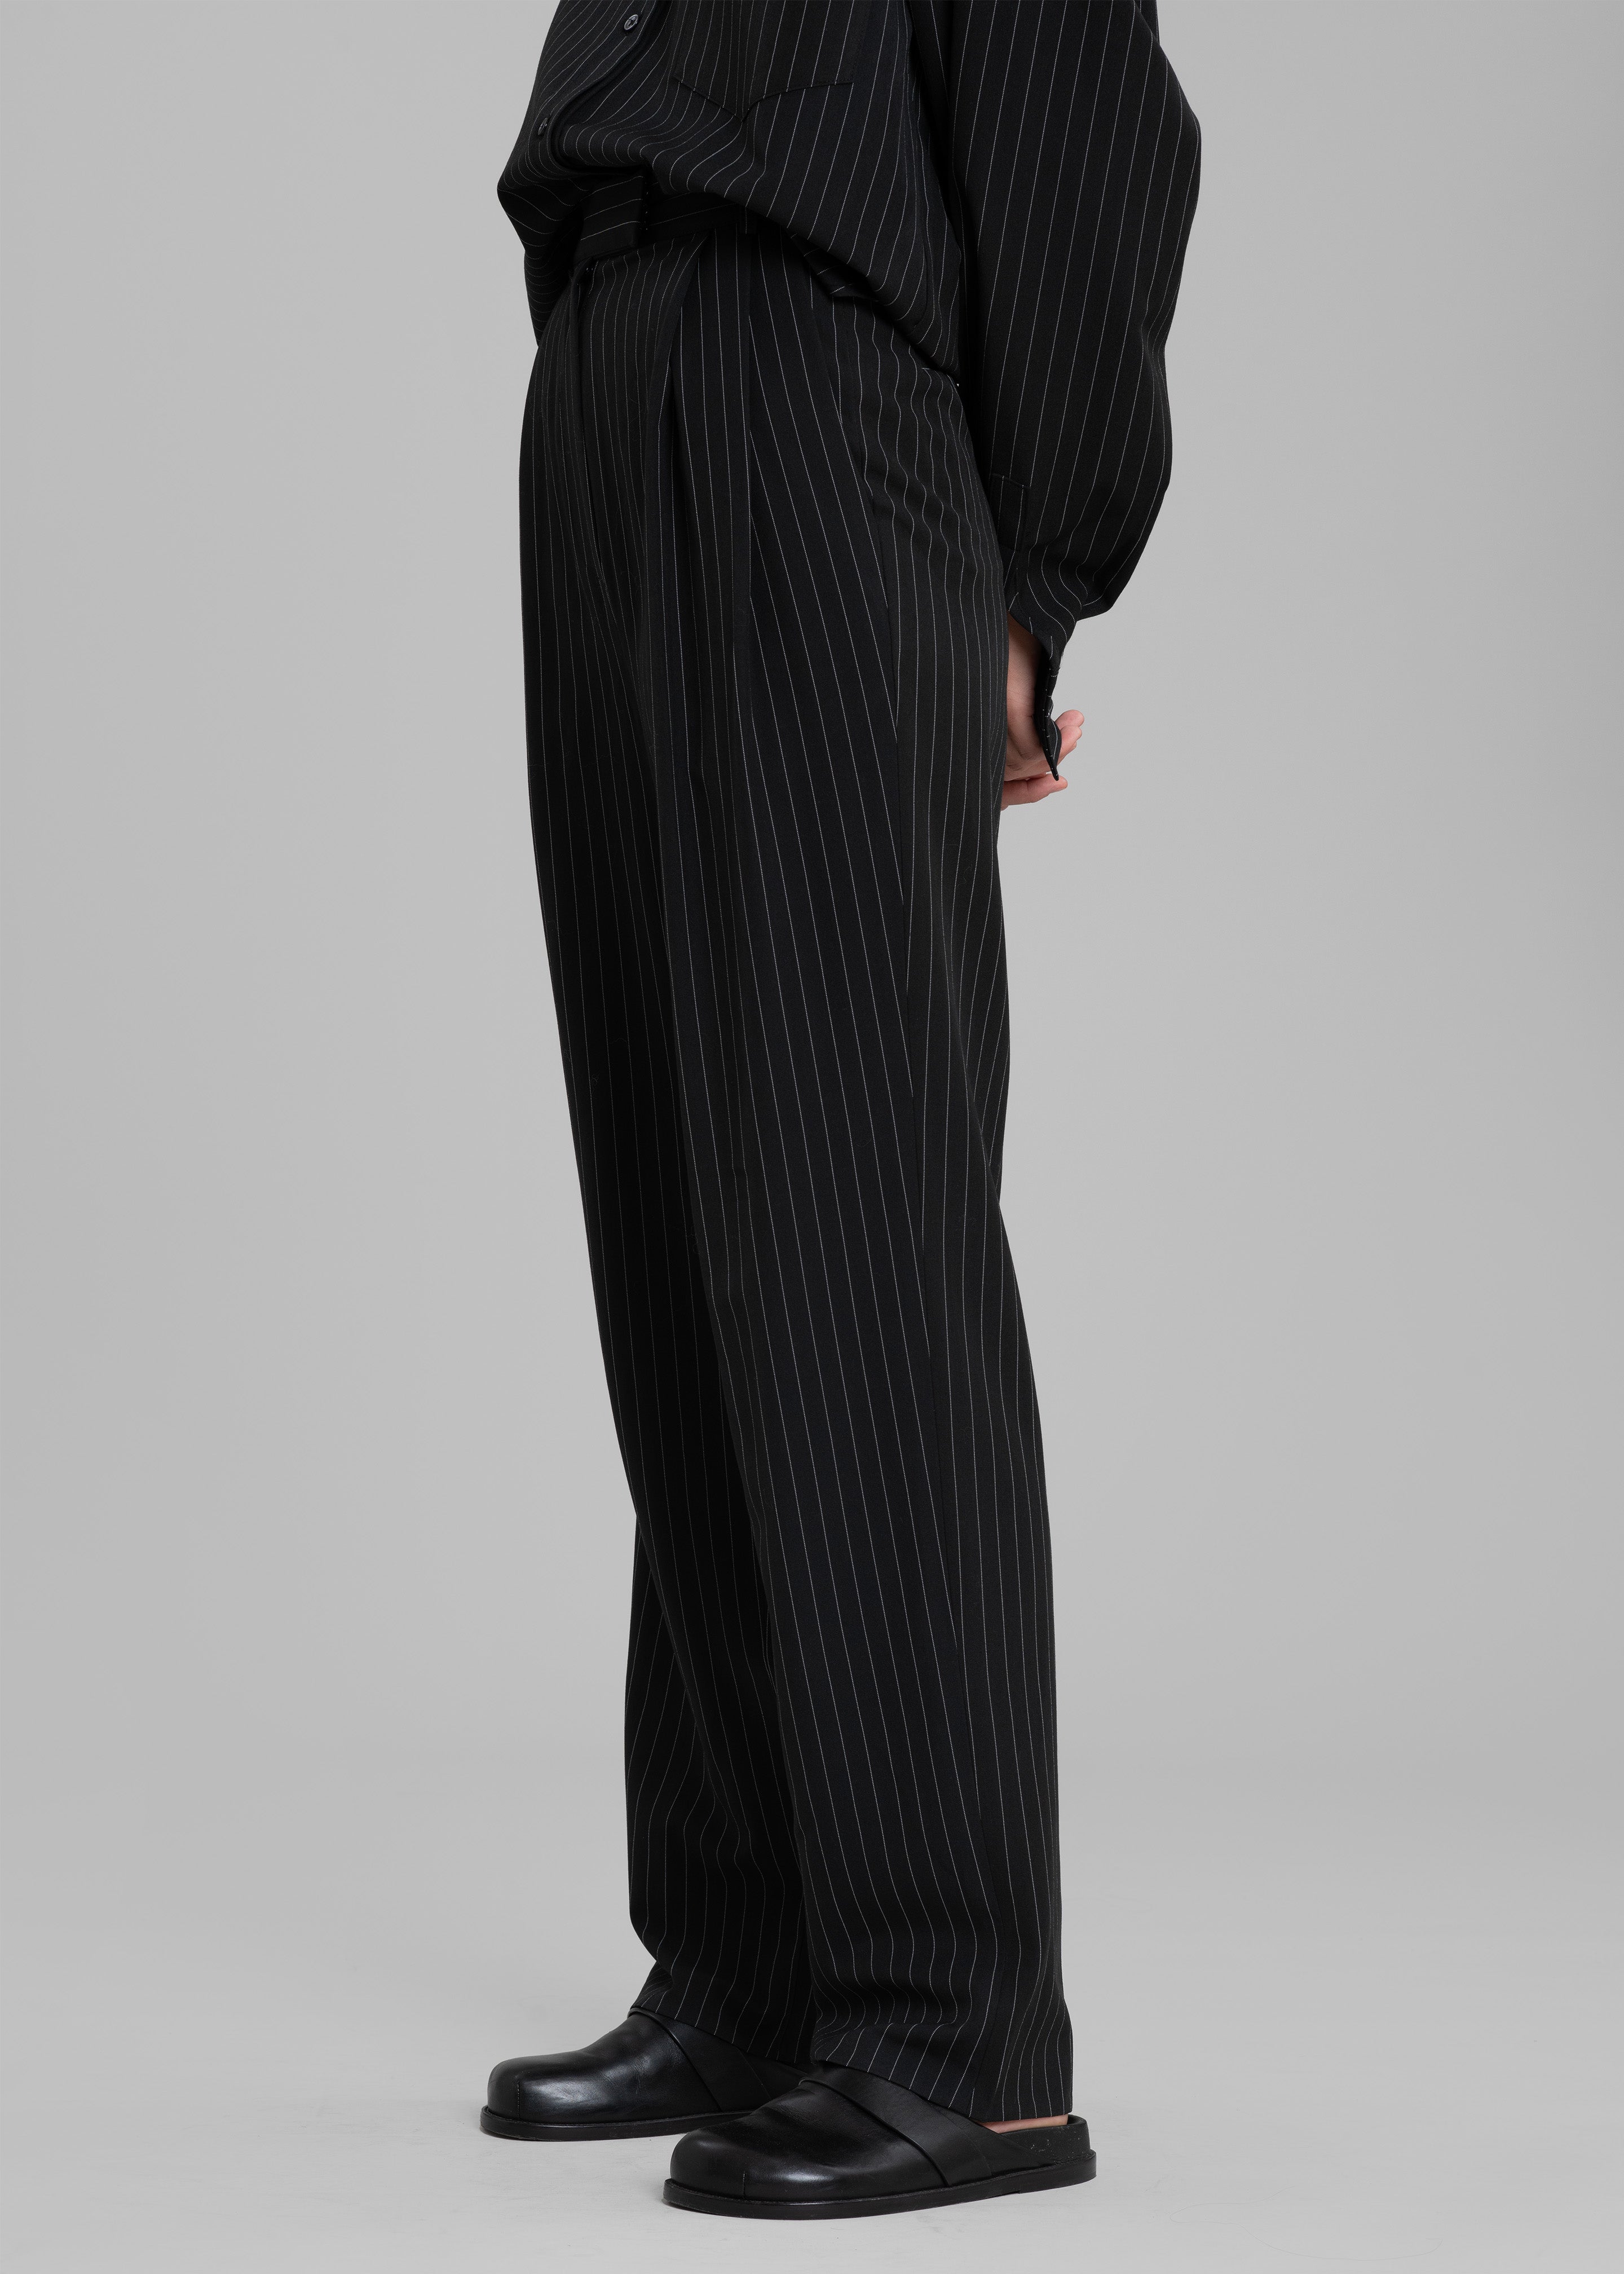 Put A Pin In It - Black Pinstripe Trousers With White Waistband – DLSB